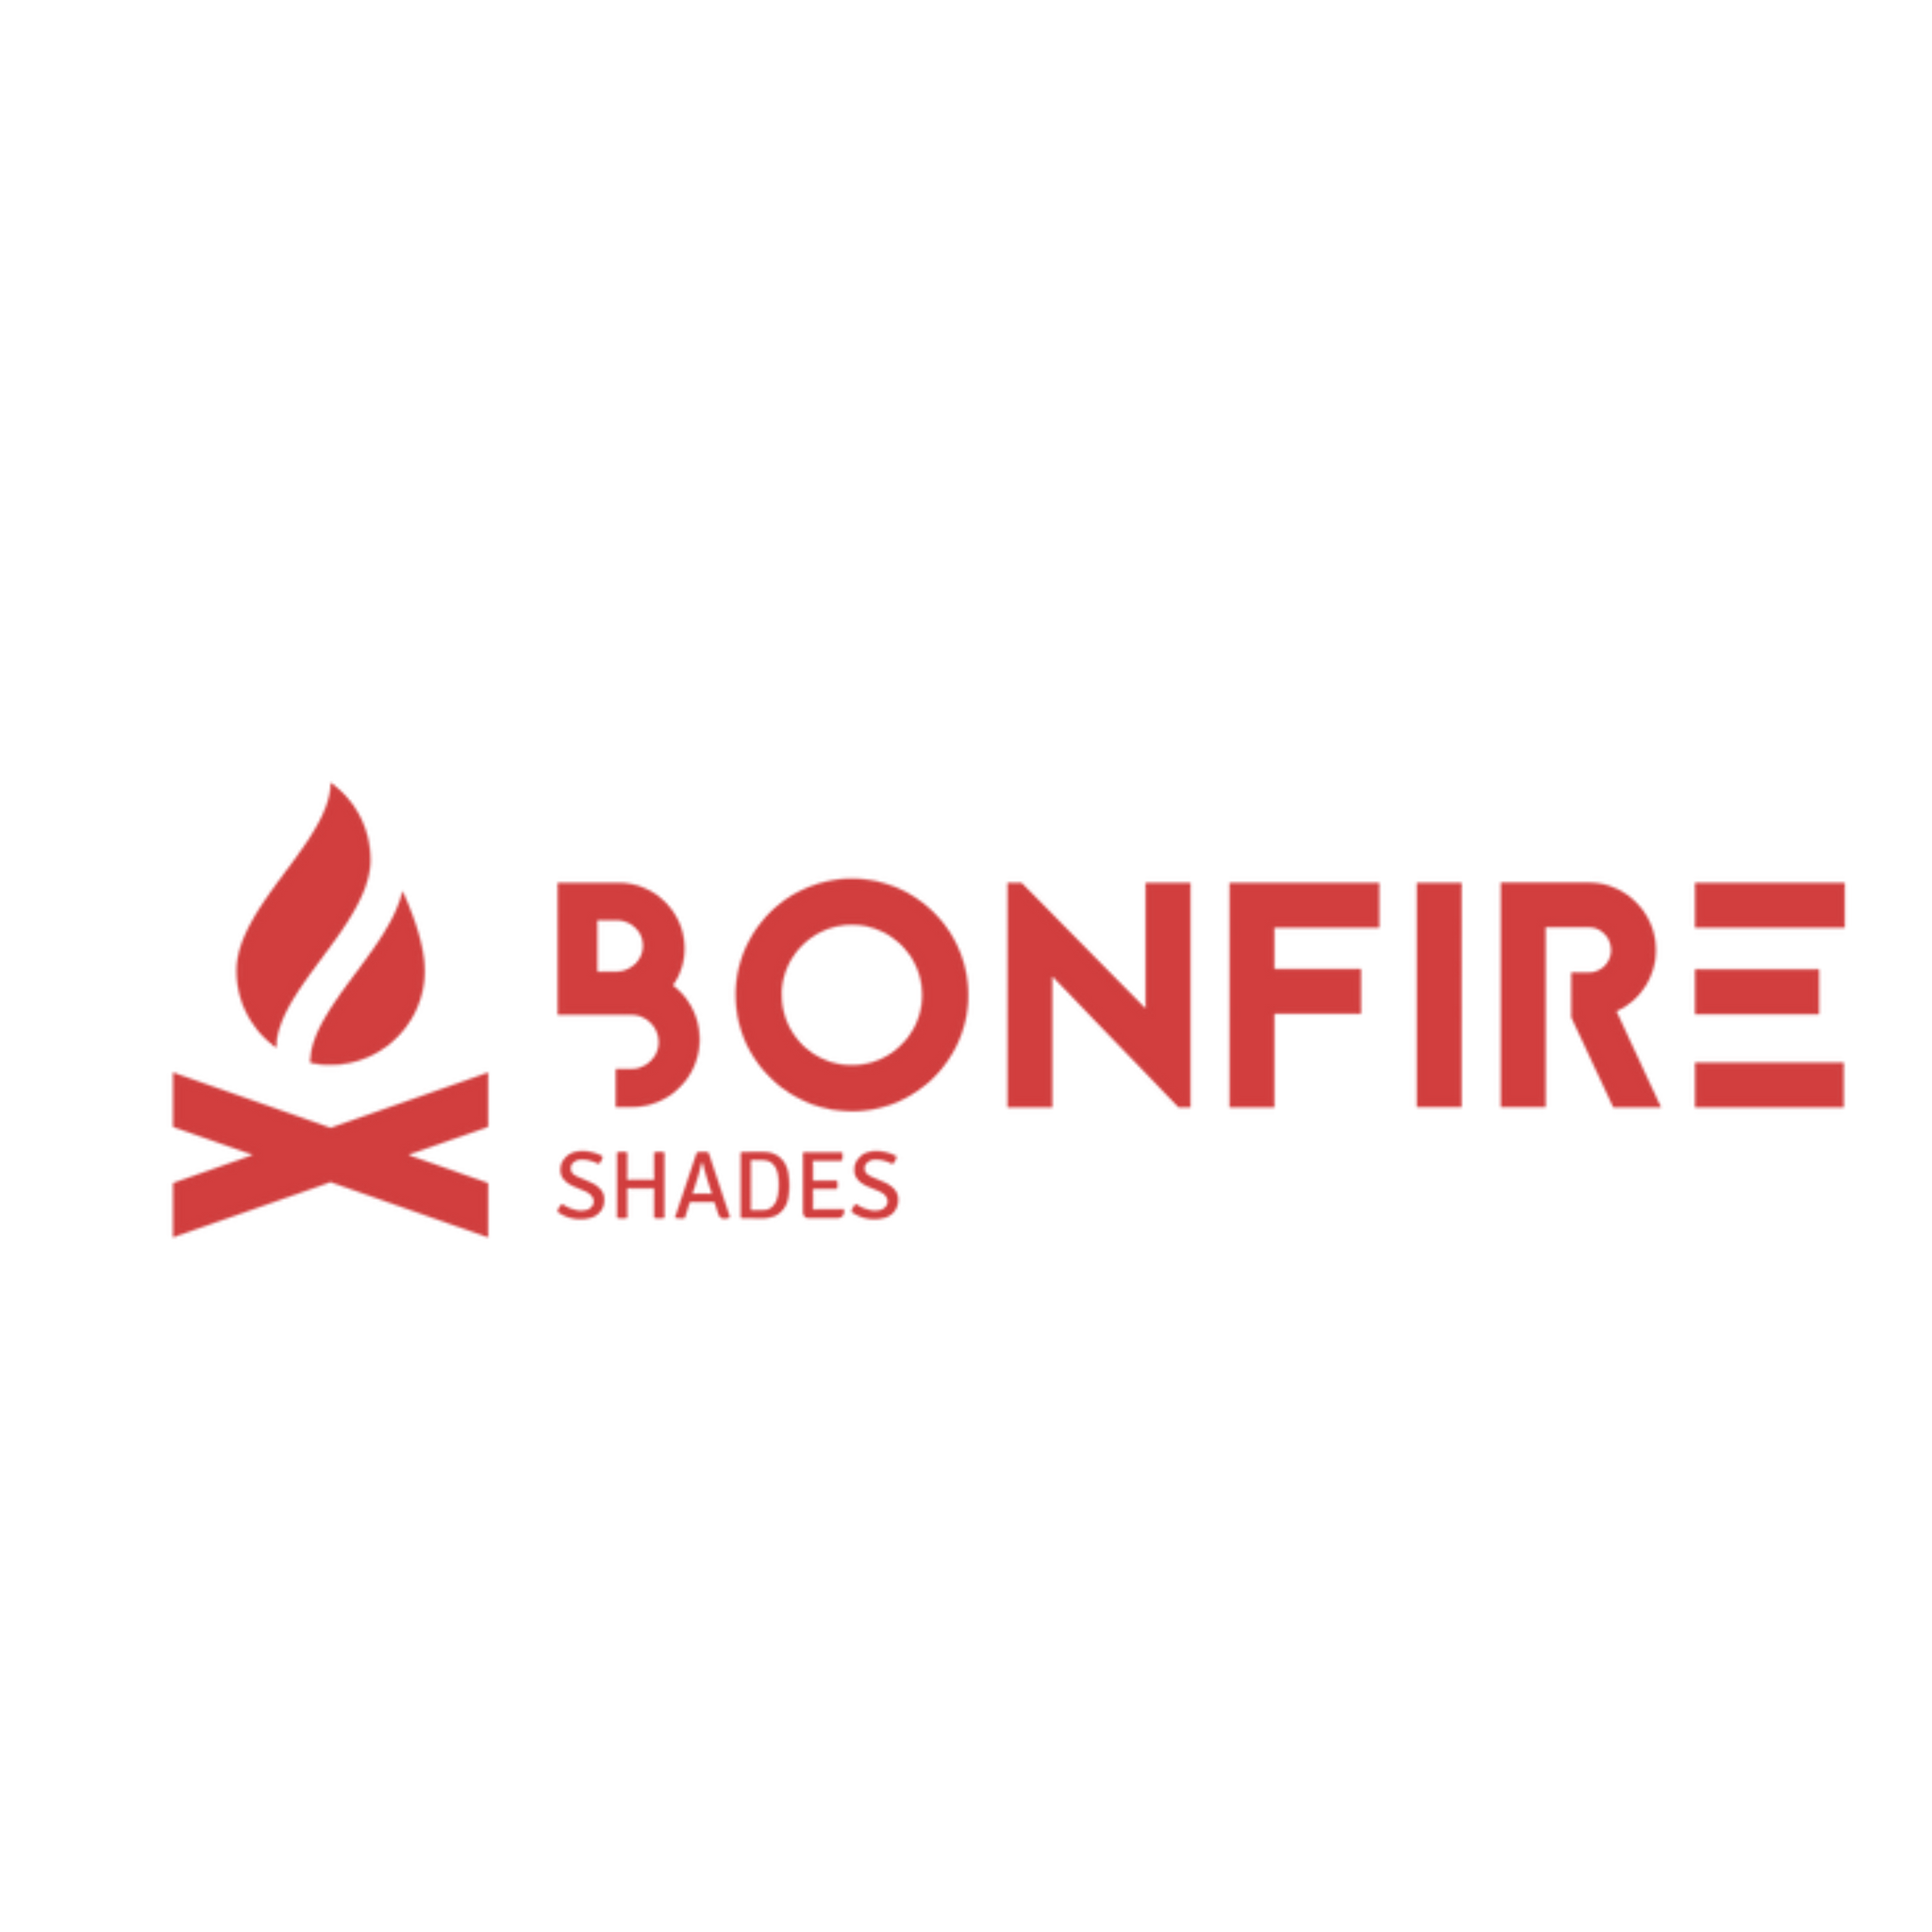 Bonfire is a local vendor business and brand ambassador who sells high quality eyewear in Calgary, Alberta, Canada.